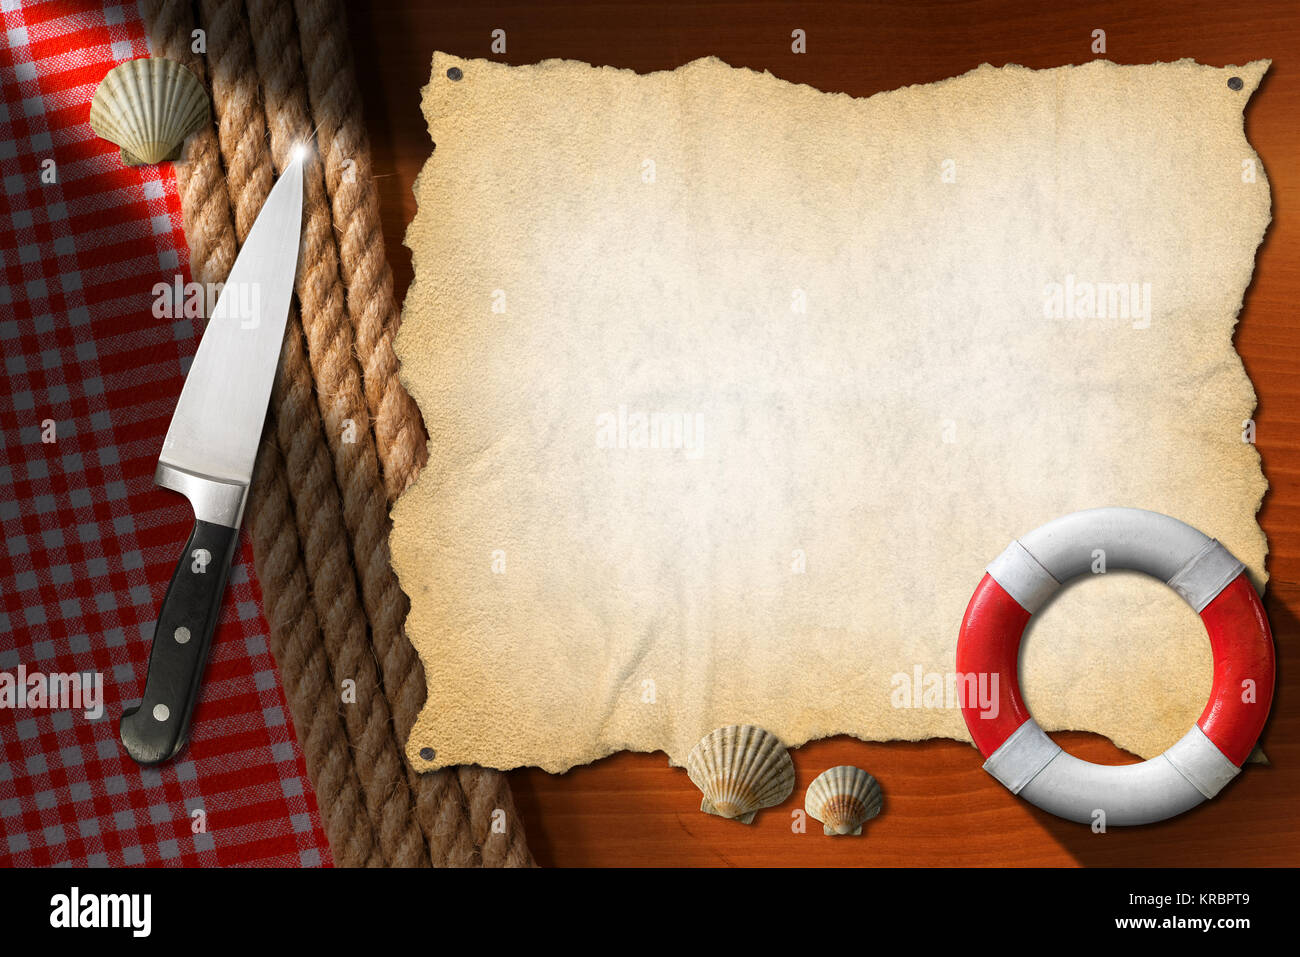 Empty parchment on brown wood wall with ropes and red checked tablecloth, kitchen knife, seashells, red and white lifebuoy. Template for recipes or se Stock Photo